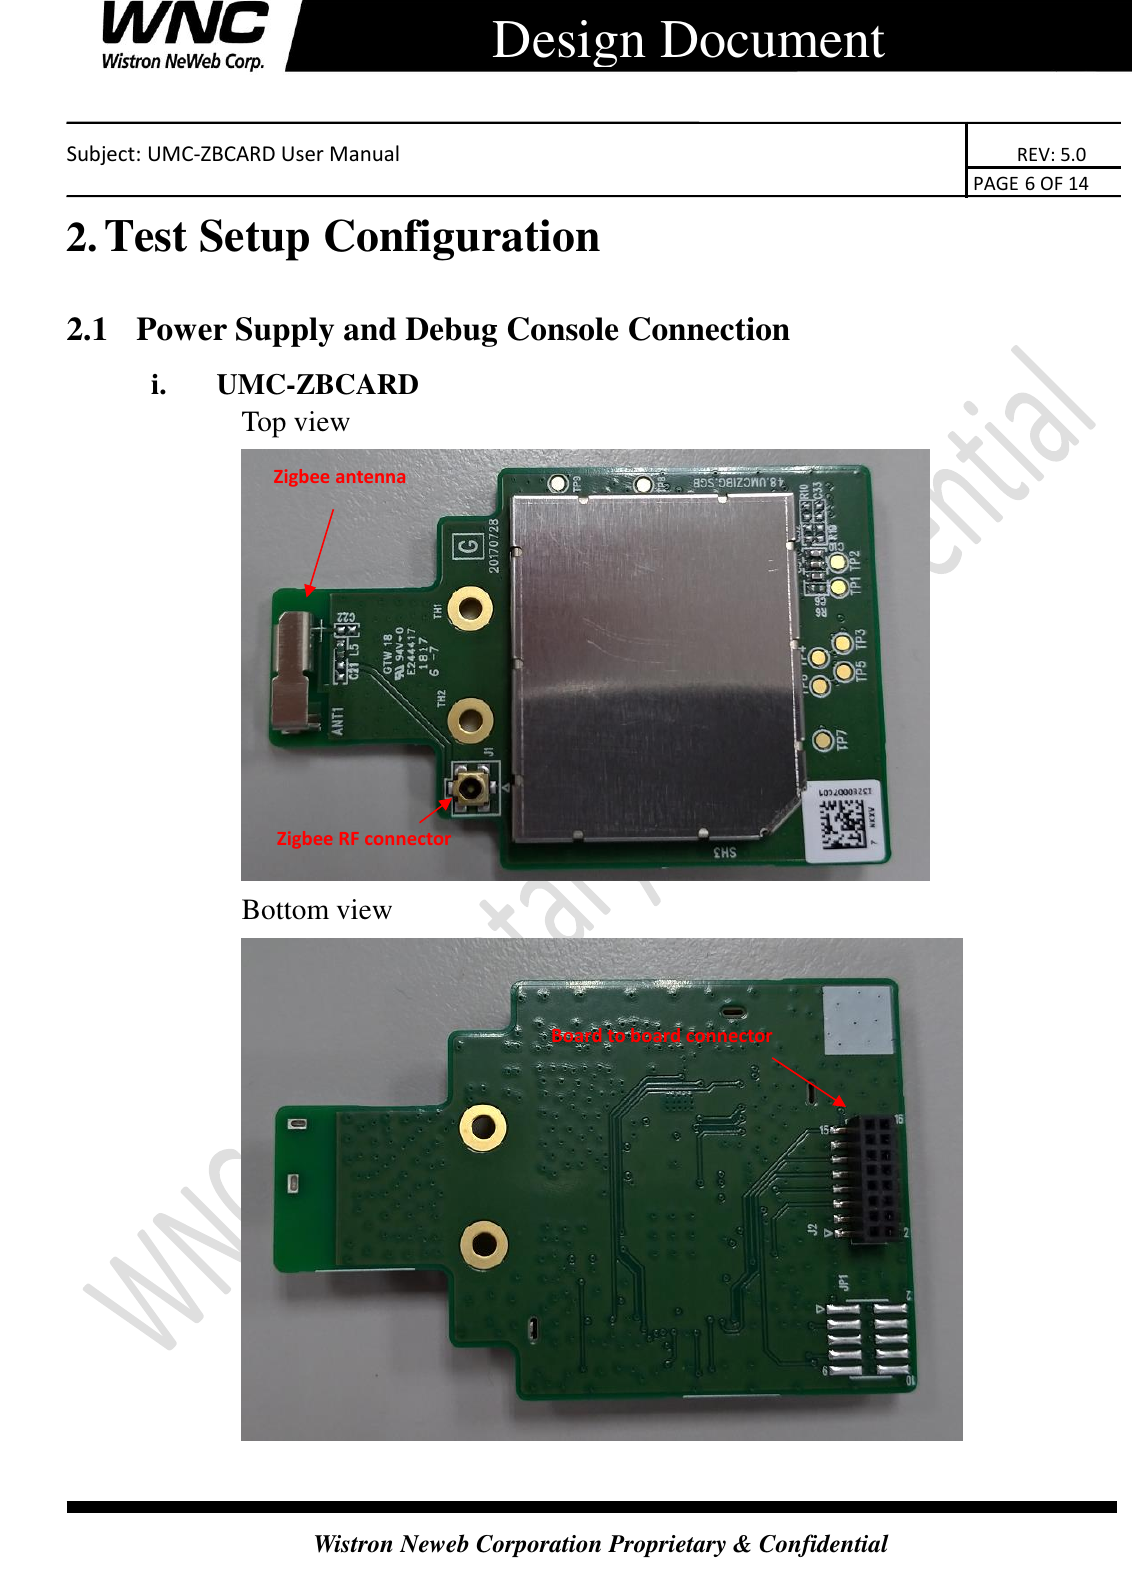    Subject: UMC-ZBCARD User Manual                                                                      REV: 5.0                                                                                        PAGE 6 OF 14  Wistron Neweb Corporation Proprietary &amp; Confidential      Design Document 2. Test Setup Configuration 2.1   Power Supply and Debug Console Connection i. UMC-ZBCARD Top view  Bottom view    Zigbee antenna Zigbee RF connector Board to board connector 